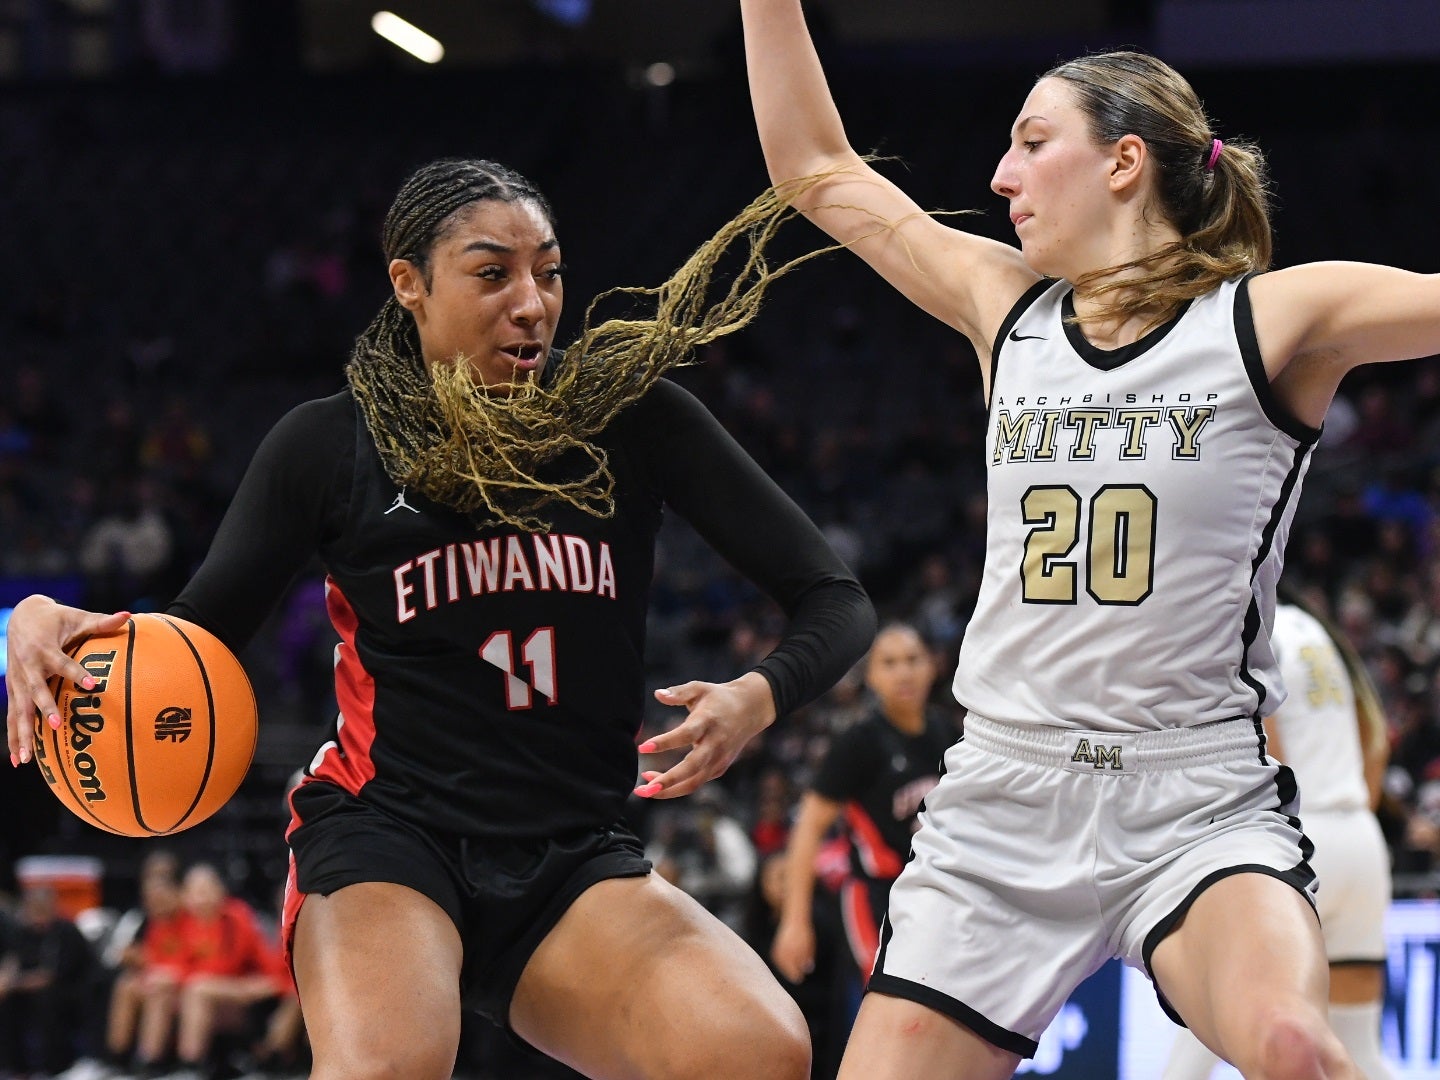 Etiwanda's Kennedy Smith battles Archbishop Mitty's McKenna Woliczko on Saturday in the CIF Open Division finals. Etiwanda won its second straight state title with a 60-48 victory over Mitty on Saturday. (Photo: David Steutel)